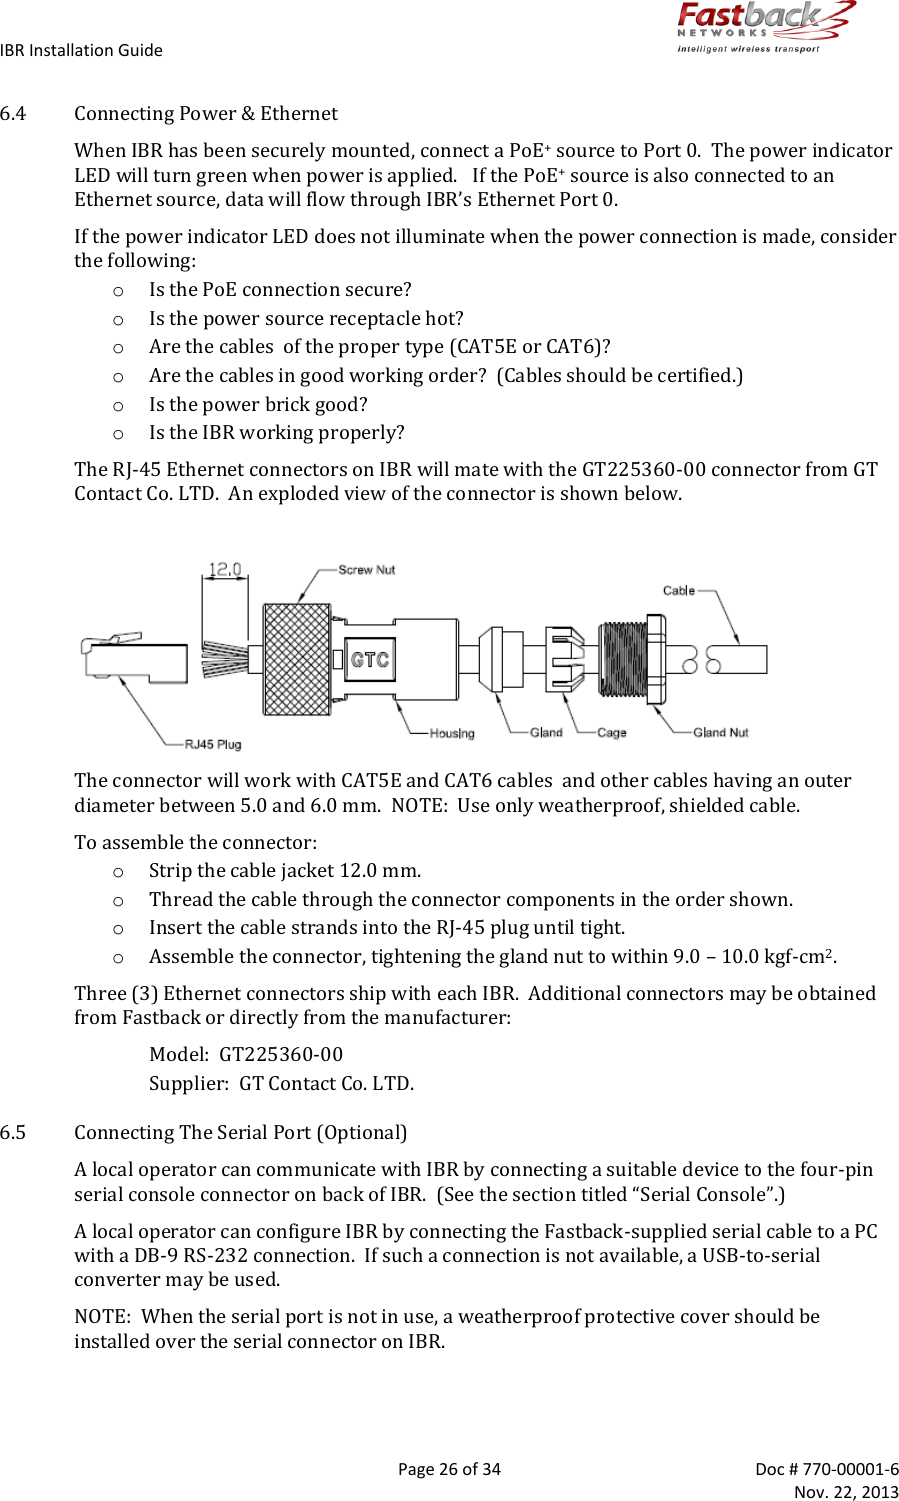 IBR Installation Guide        Page 26 of 34  Doc # 770-00001-6     Nov. 22, 2013   6.4 Connecting Power &amp; Ethernet When IBR has been securely mounted, connect a PoE+ source to Port 0.  The power indicator LED will turn green when power is applied.   If the PoE+ source is also connected to an Ethernet source, data will flow through IBR’s Ethernet Port 0. If the power indicator LED does not illuminate when the power connection is made, consider the following: o Is the PoE connection secure? o Is the power source receptacle hot? o Are the cables  of the proper type (CAT5E or CAT6)? o Are the cables in good working order?  (Cables should be certified.) o Is the power brick good? o Is the IBR working properly? The RJ-45 Ethernet connectors on IBR will mate with the GT225360-00 connector from GT Contact Co. LTD.  An exploded view of the connector is shown below.   The connector will work with CAT5E and CAT6 cables  and other cables having an outer diameter between 5.0 and 6.0 mm.  NOTE:  Use only weatherproof, shielded cable. To assemble the connector: o Strip the cable jacket 12.0 mm. o Thread the cable through the connector components in the order shown. o Insert the cable strands into the RJ-45 plug until tight. o Assemble the connector, tightening the gland nut to within 9.0 – 10.0 kgf-cm2. Three (3) Ethernet connectors ship with each IBR.  Additional connectors may be obtained from Fastback or directly from the manufacturer: Model:  GT225360-00  Supplier:  GT Contact Co. LTD.   6.5 Connecting The Serial Port (Optional) A local operator can communicate with IBR by connecting a suitable device to the four-pin serial console connector on back of IBR.  (See the section titled “Serial Console”.) A local operator can configure IBR by connecting the Fastback-supplied serial cable to a PC with a DB-9 RS-232 connection.  If such a connection is not available, a USB-to-serial converter may be used.  NOTE:  When the serial port is not in use, a weatherproof protective cover should be installed over the serial connector on IBR. 